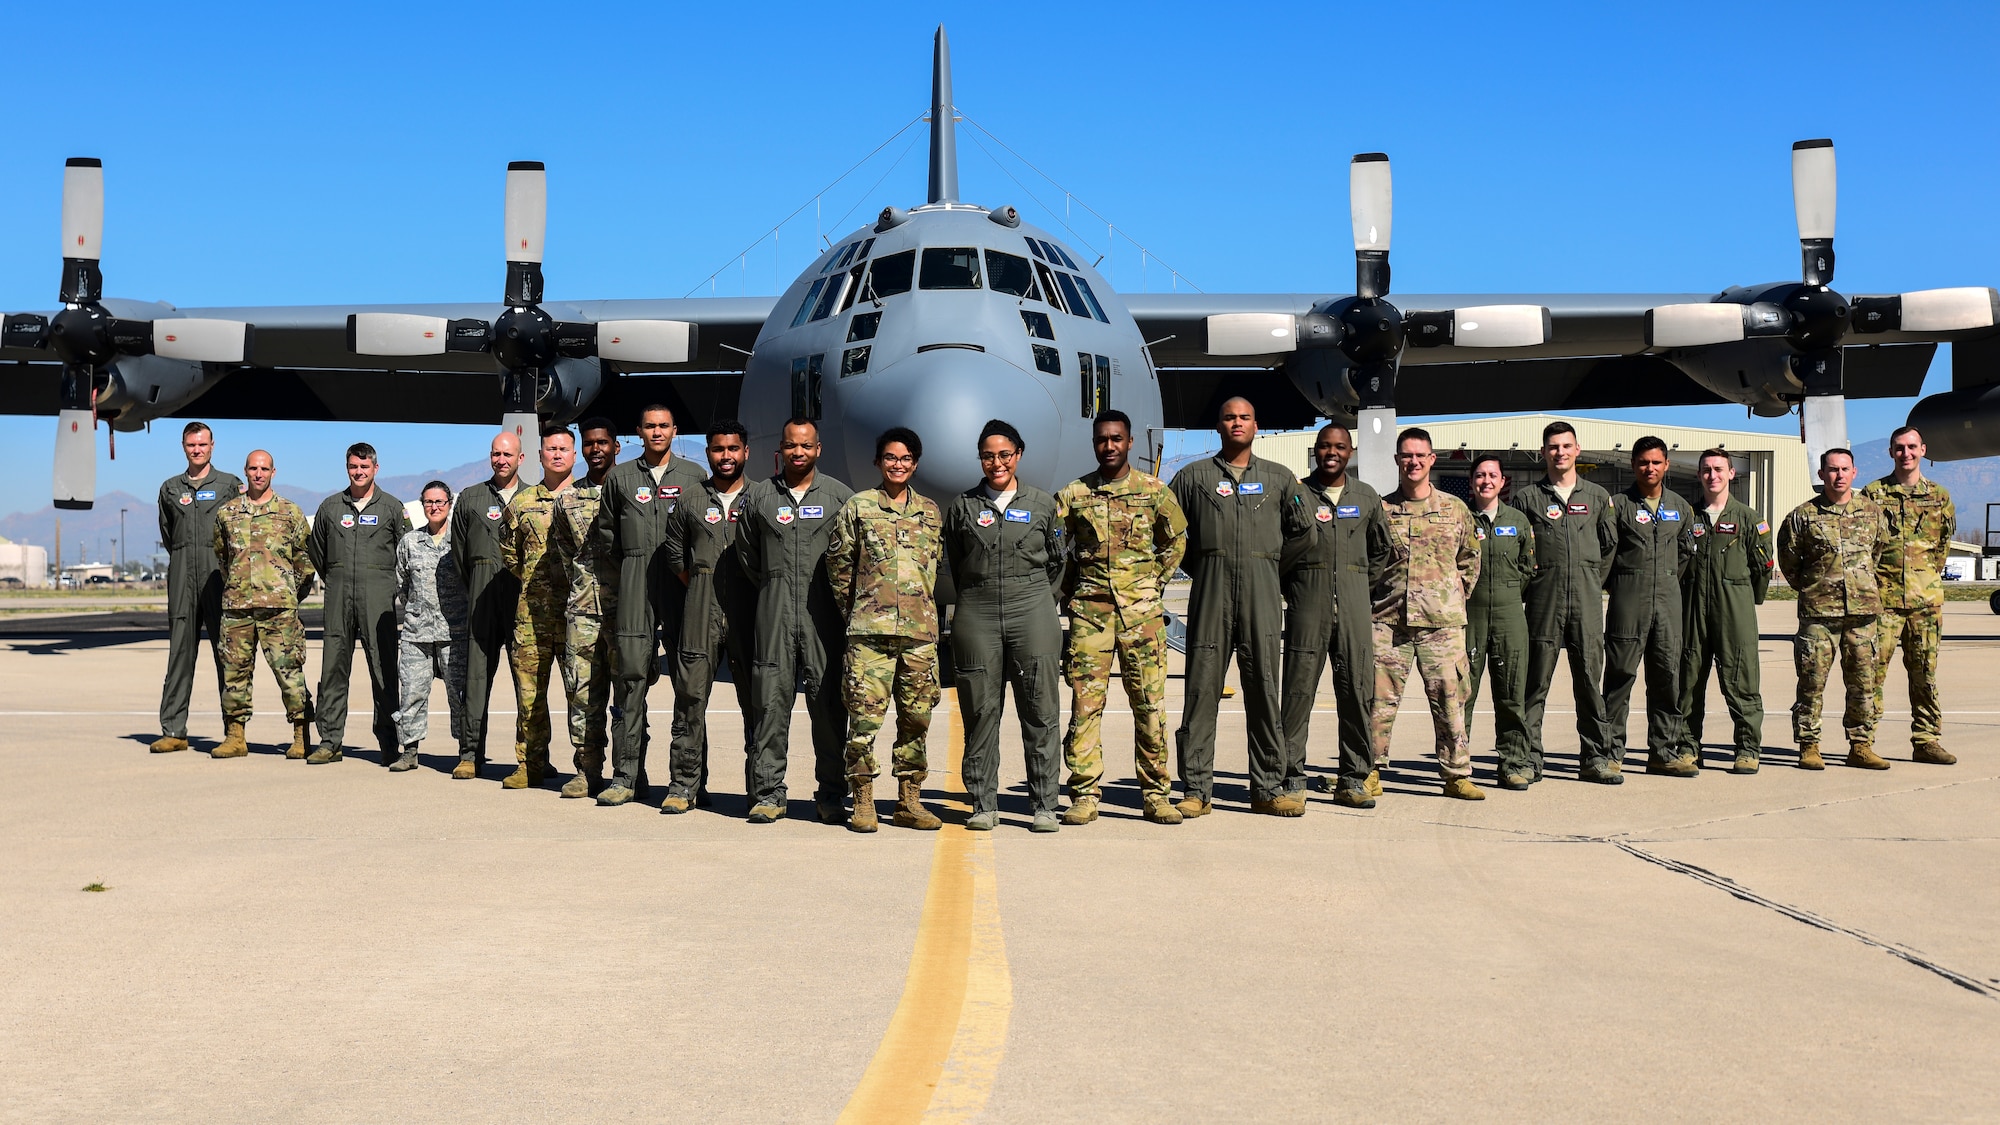 Airmen pose for a photo